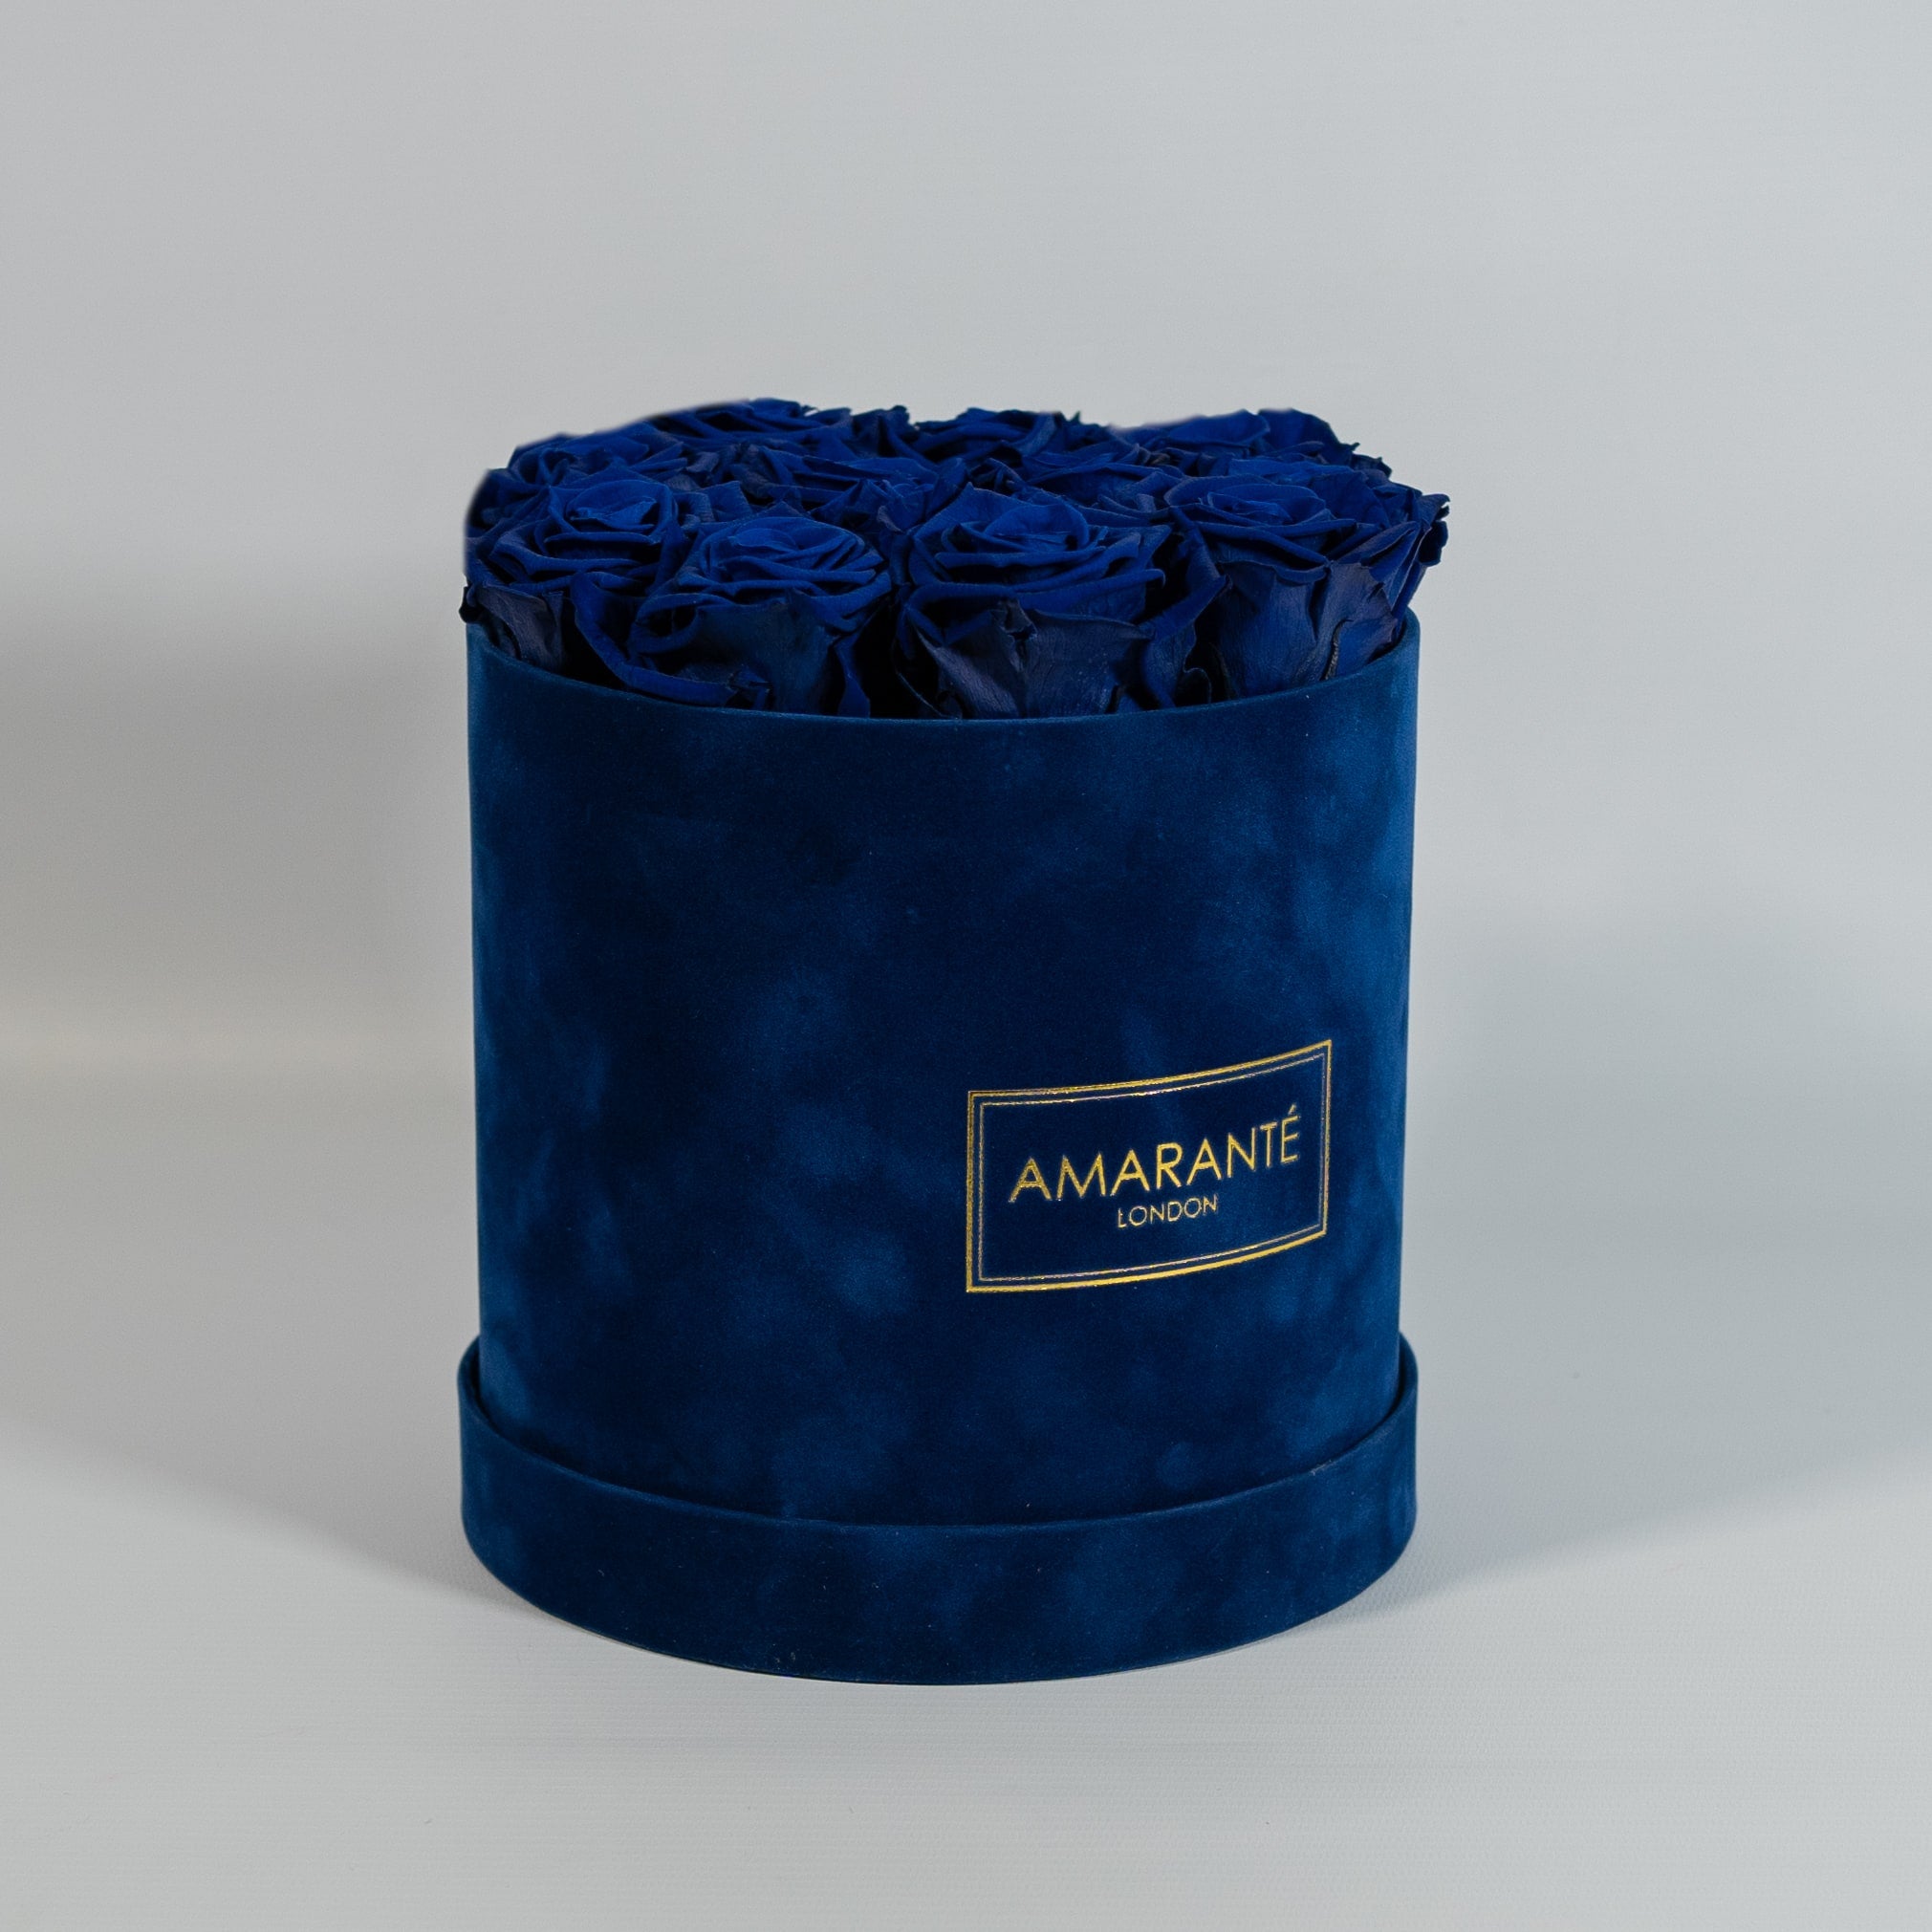 Luxurious royal blue Roses in a monochromatic blue box 